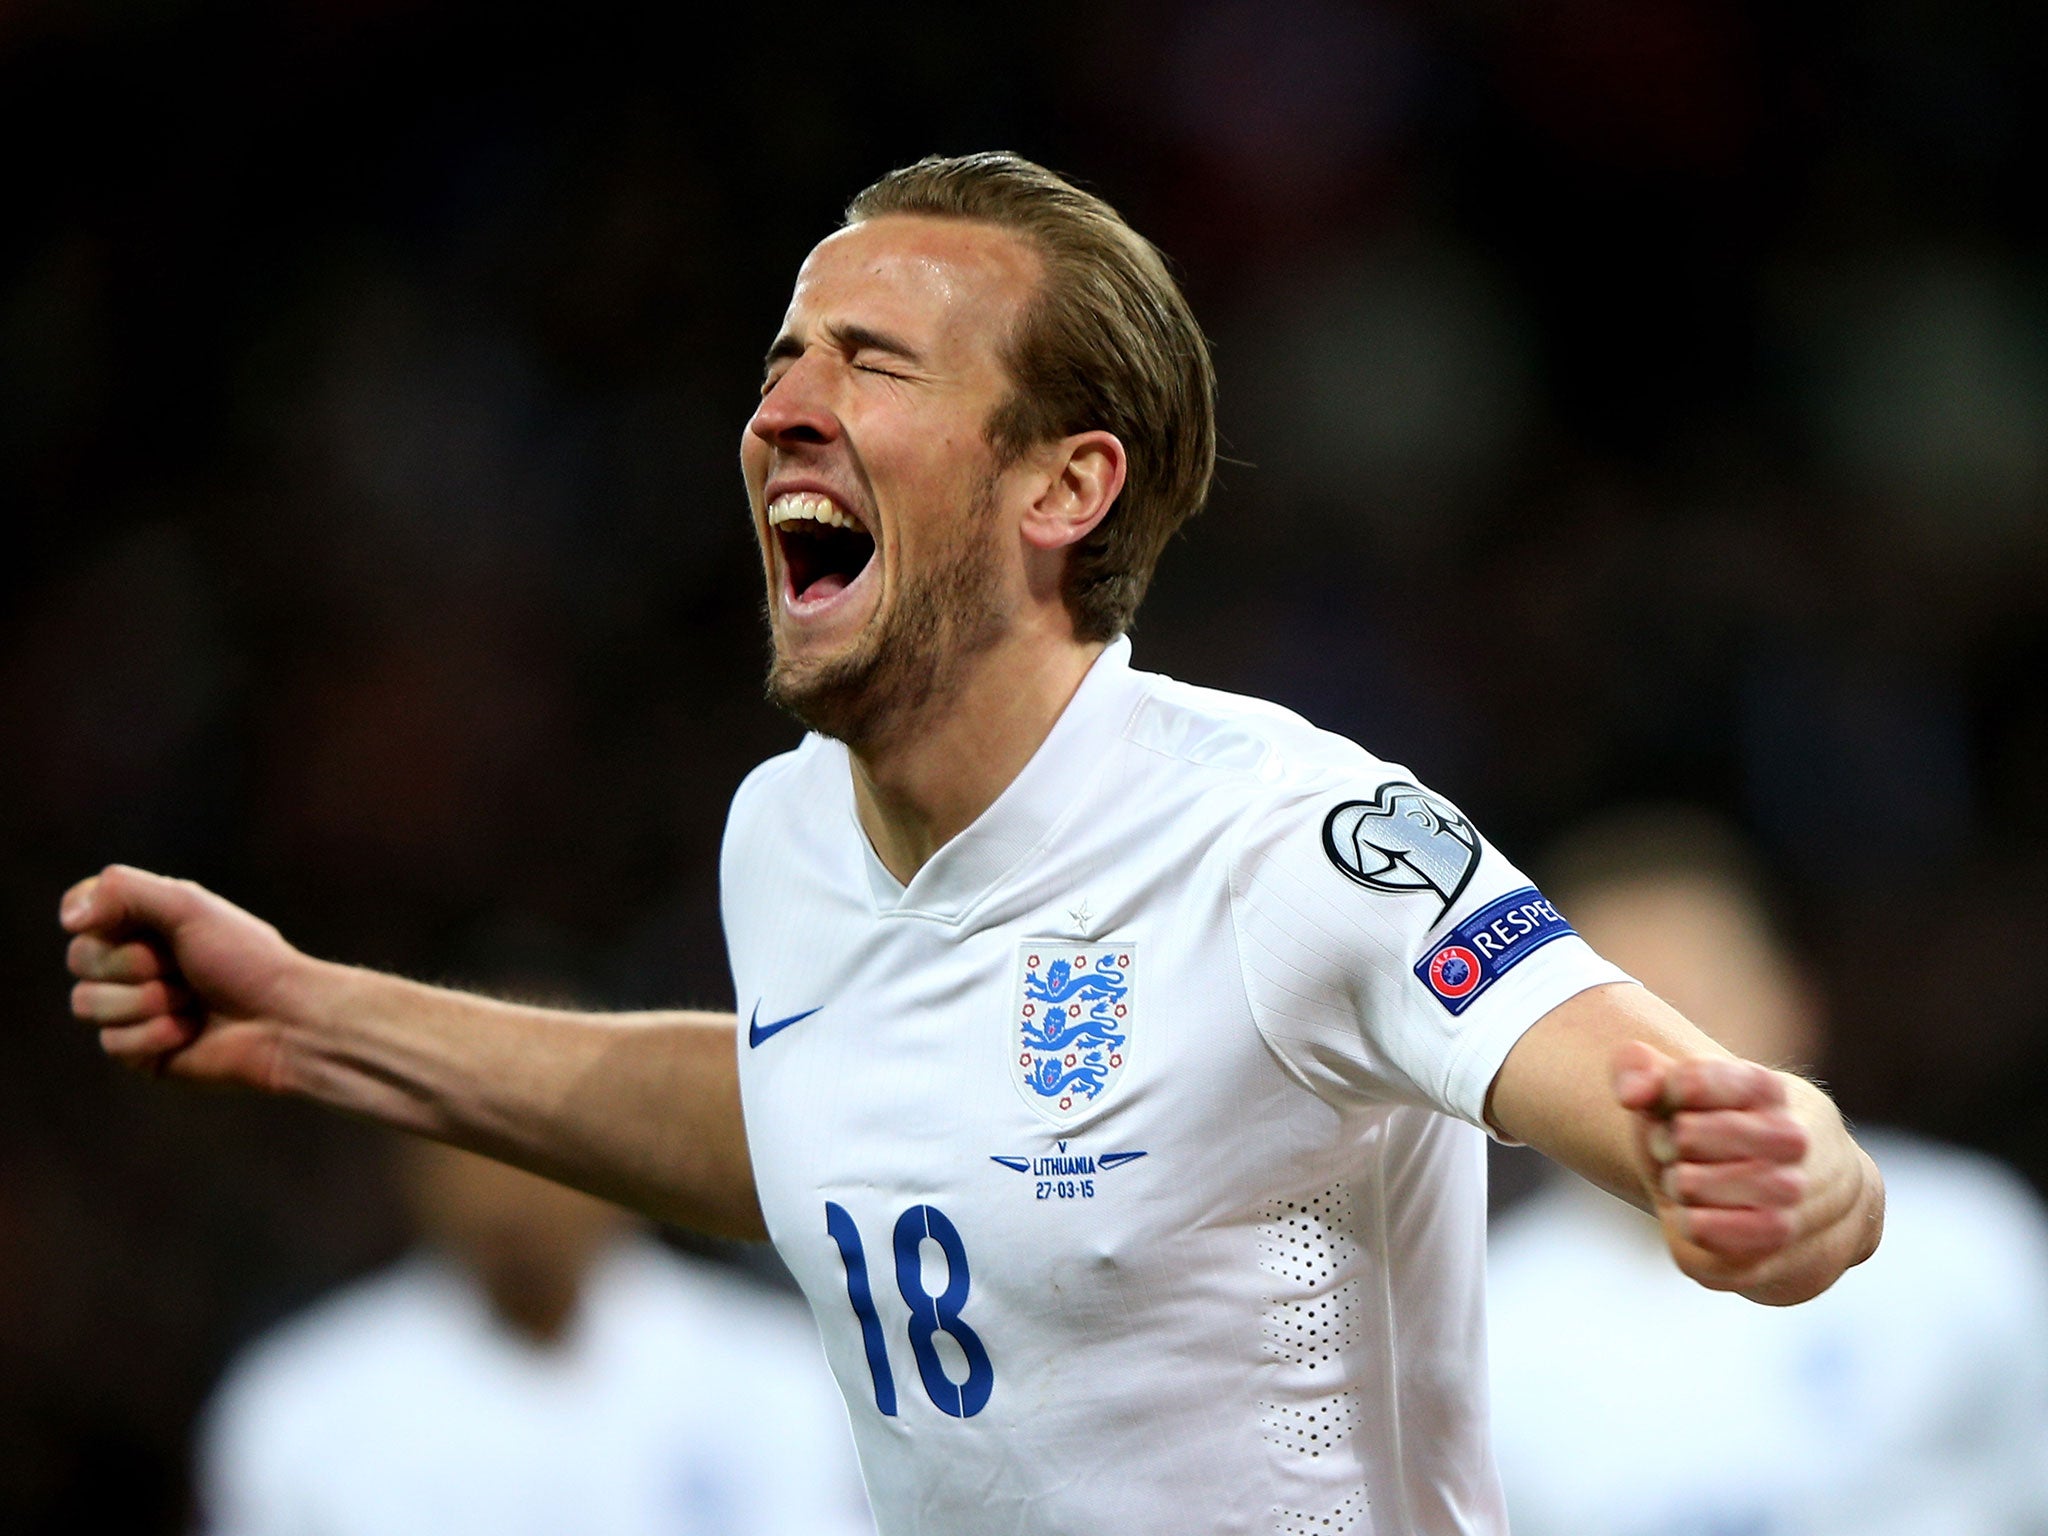 Harry Kane has scored 31 goals for club and country this season